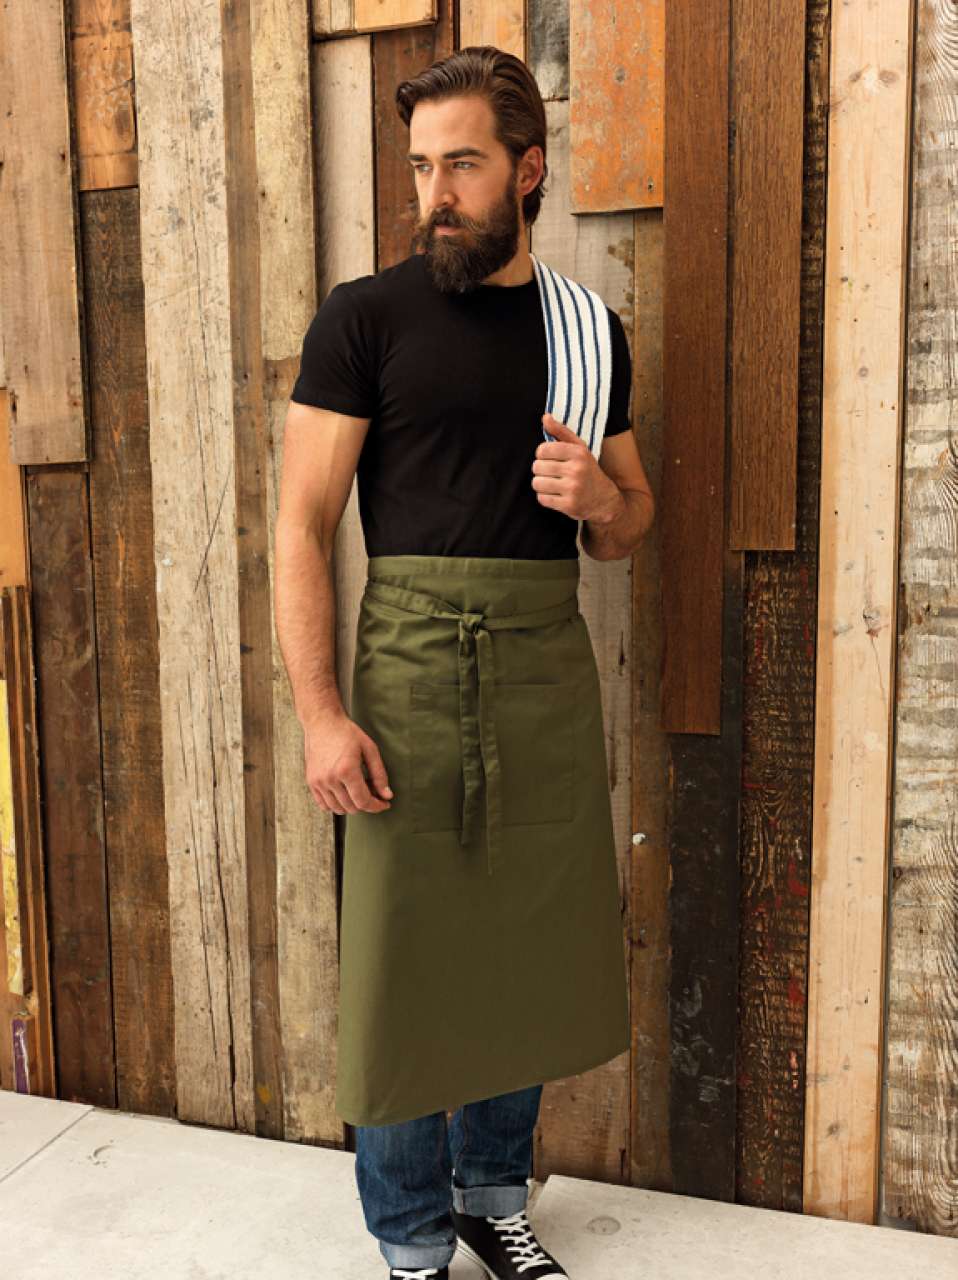 'COLOURS COLLECTION’ BAR APRON WITH POCKET s logom 